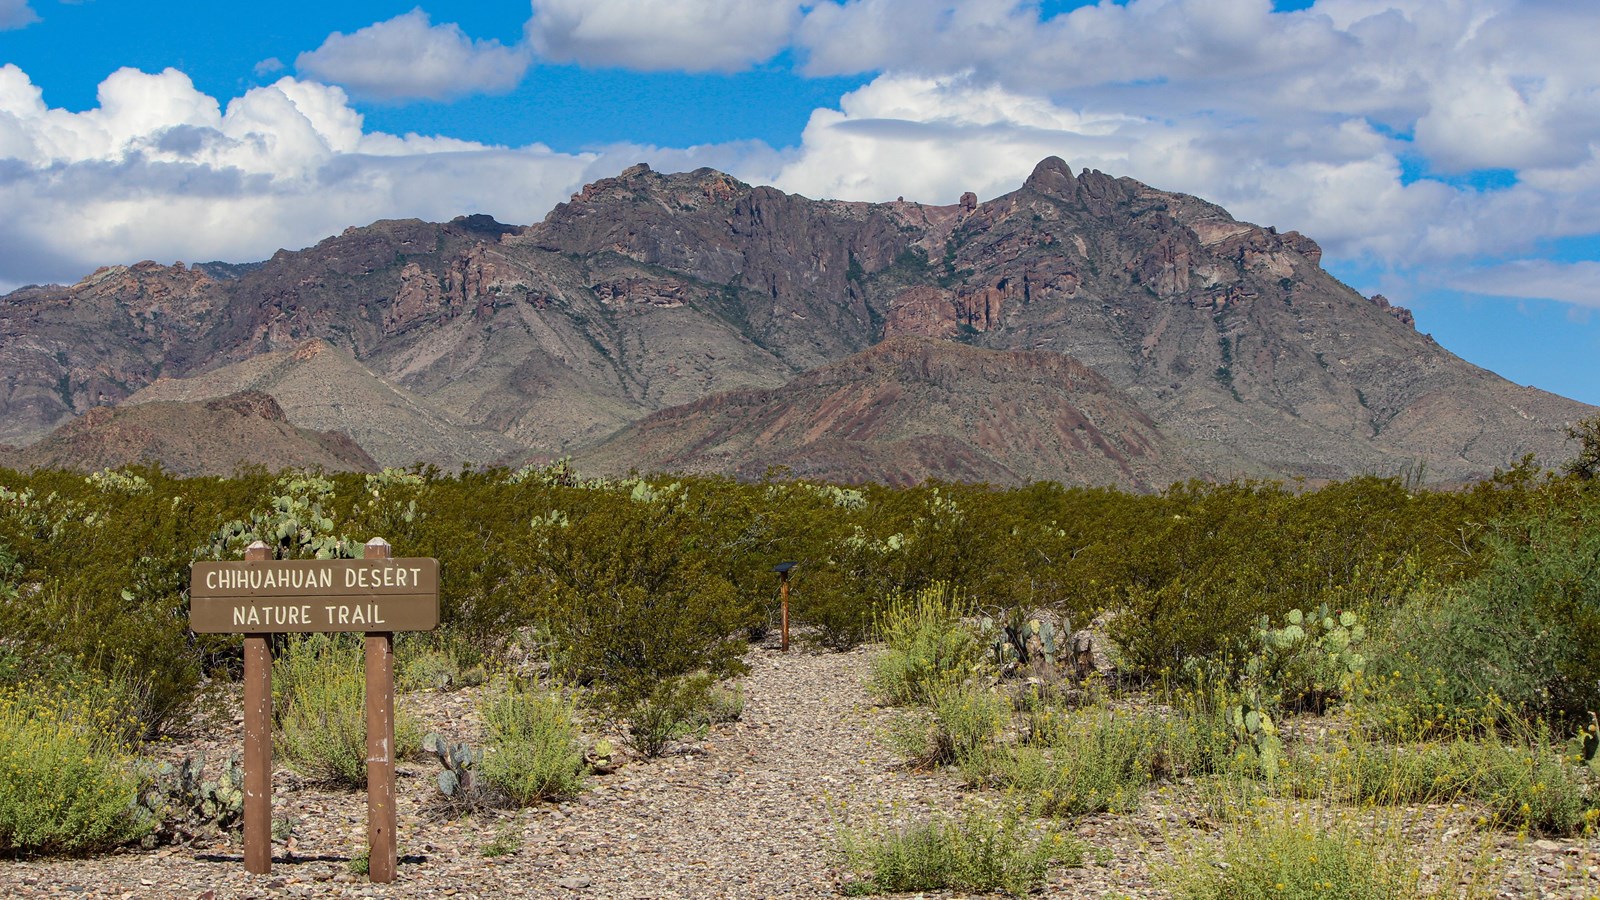 A gravel path begins next to a brown wooden trailhead sign and heads west towards the Chisos Mtns.